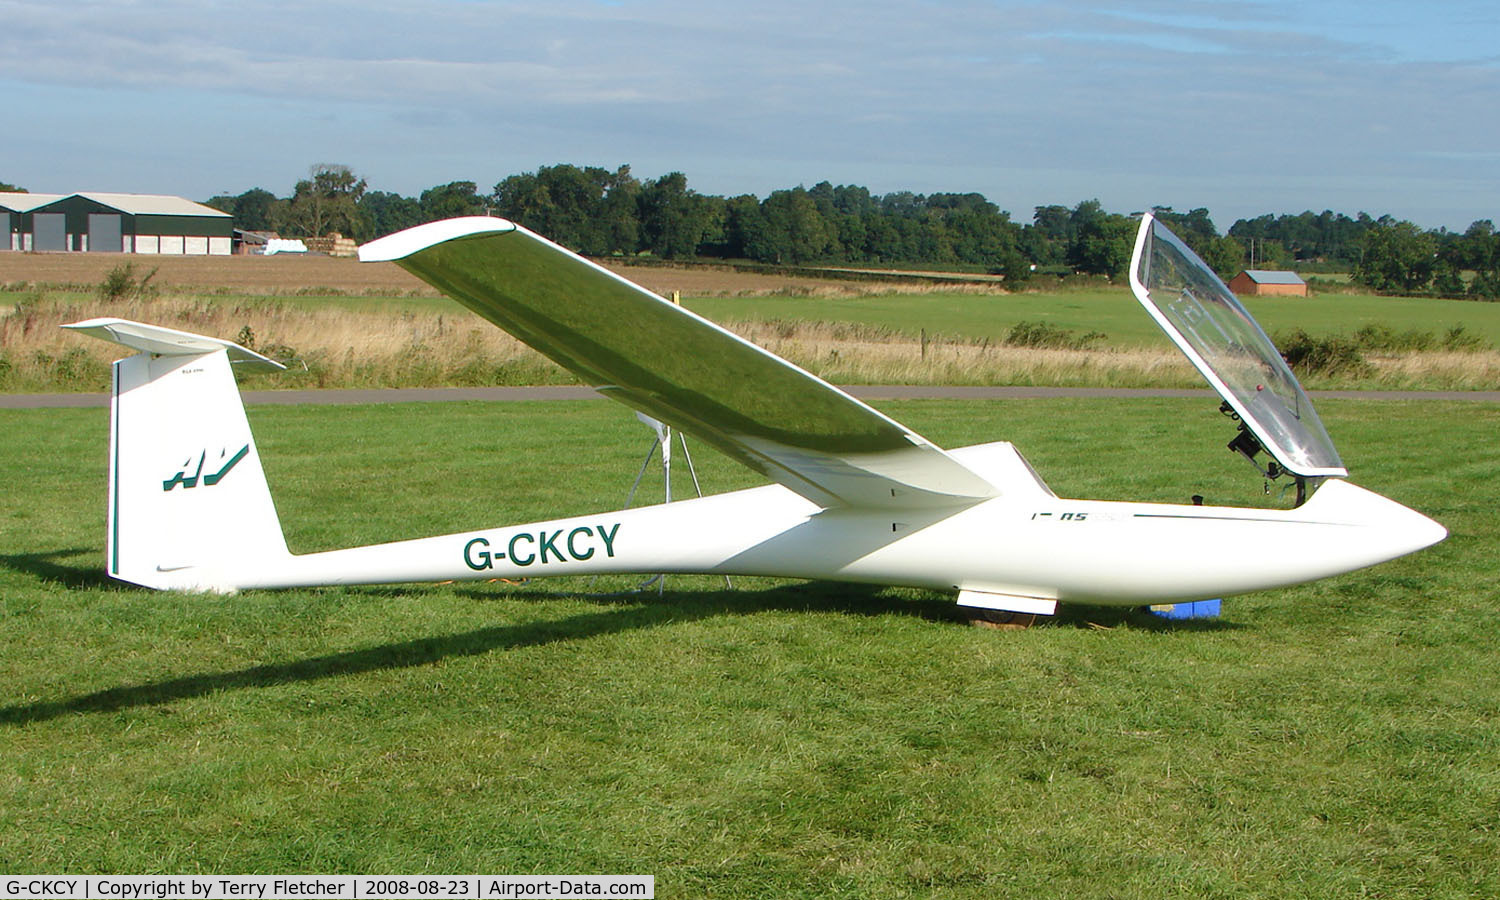 G-CKCY, 1978 Schleicher ASW-20 C/N 20068, Competitor in the Midland Regional Gliding Championship at Husband's Bosworth